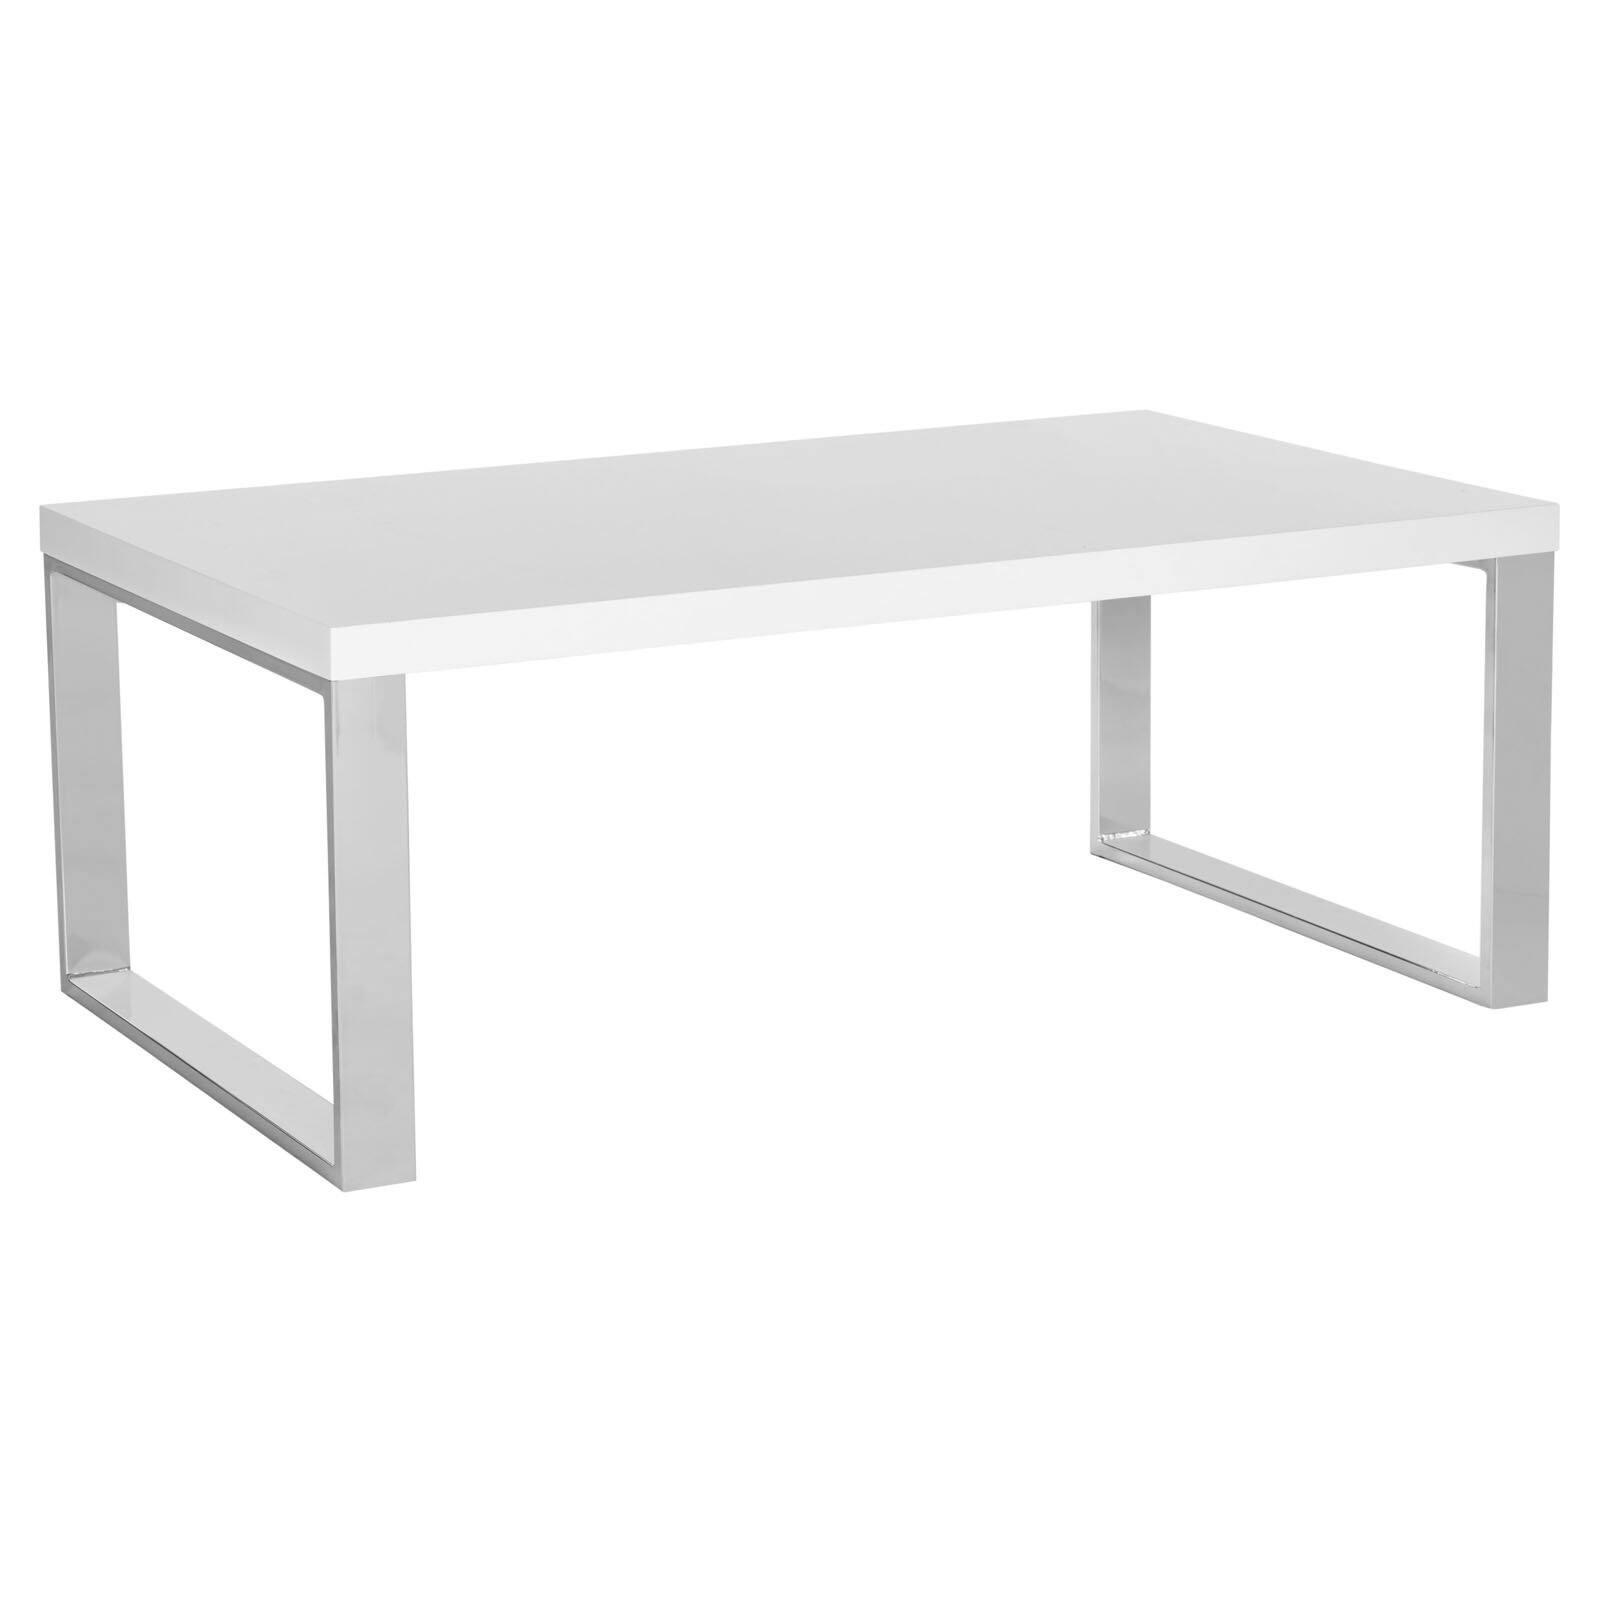 Transitional Rectangular Coffee Table in White and Silver